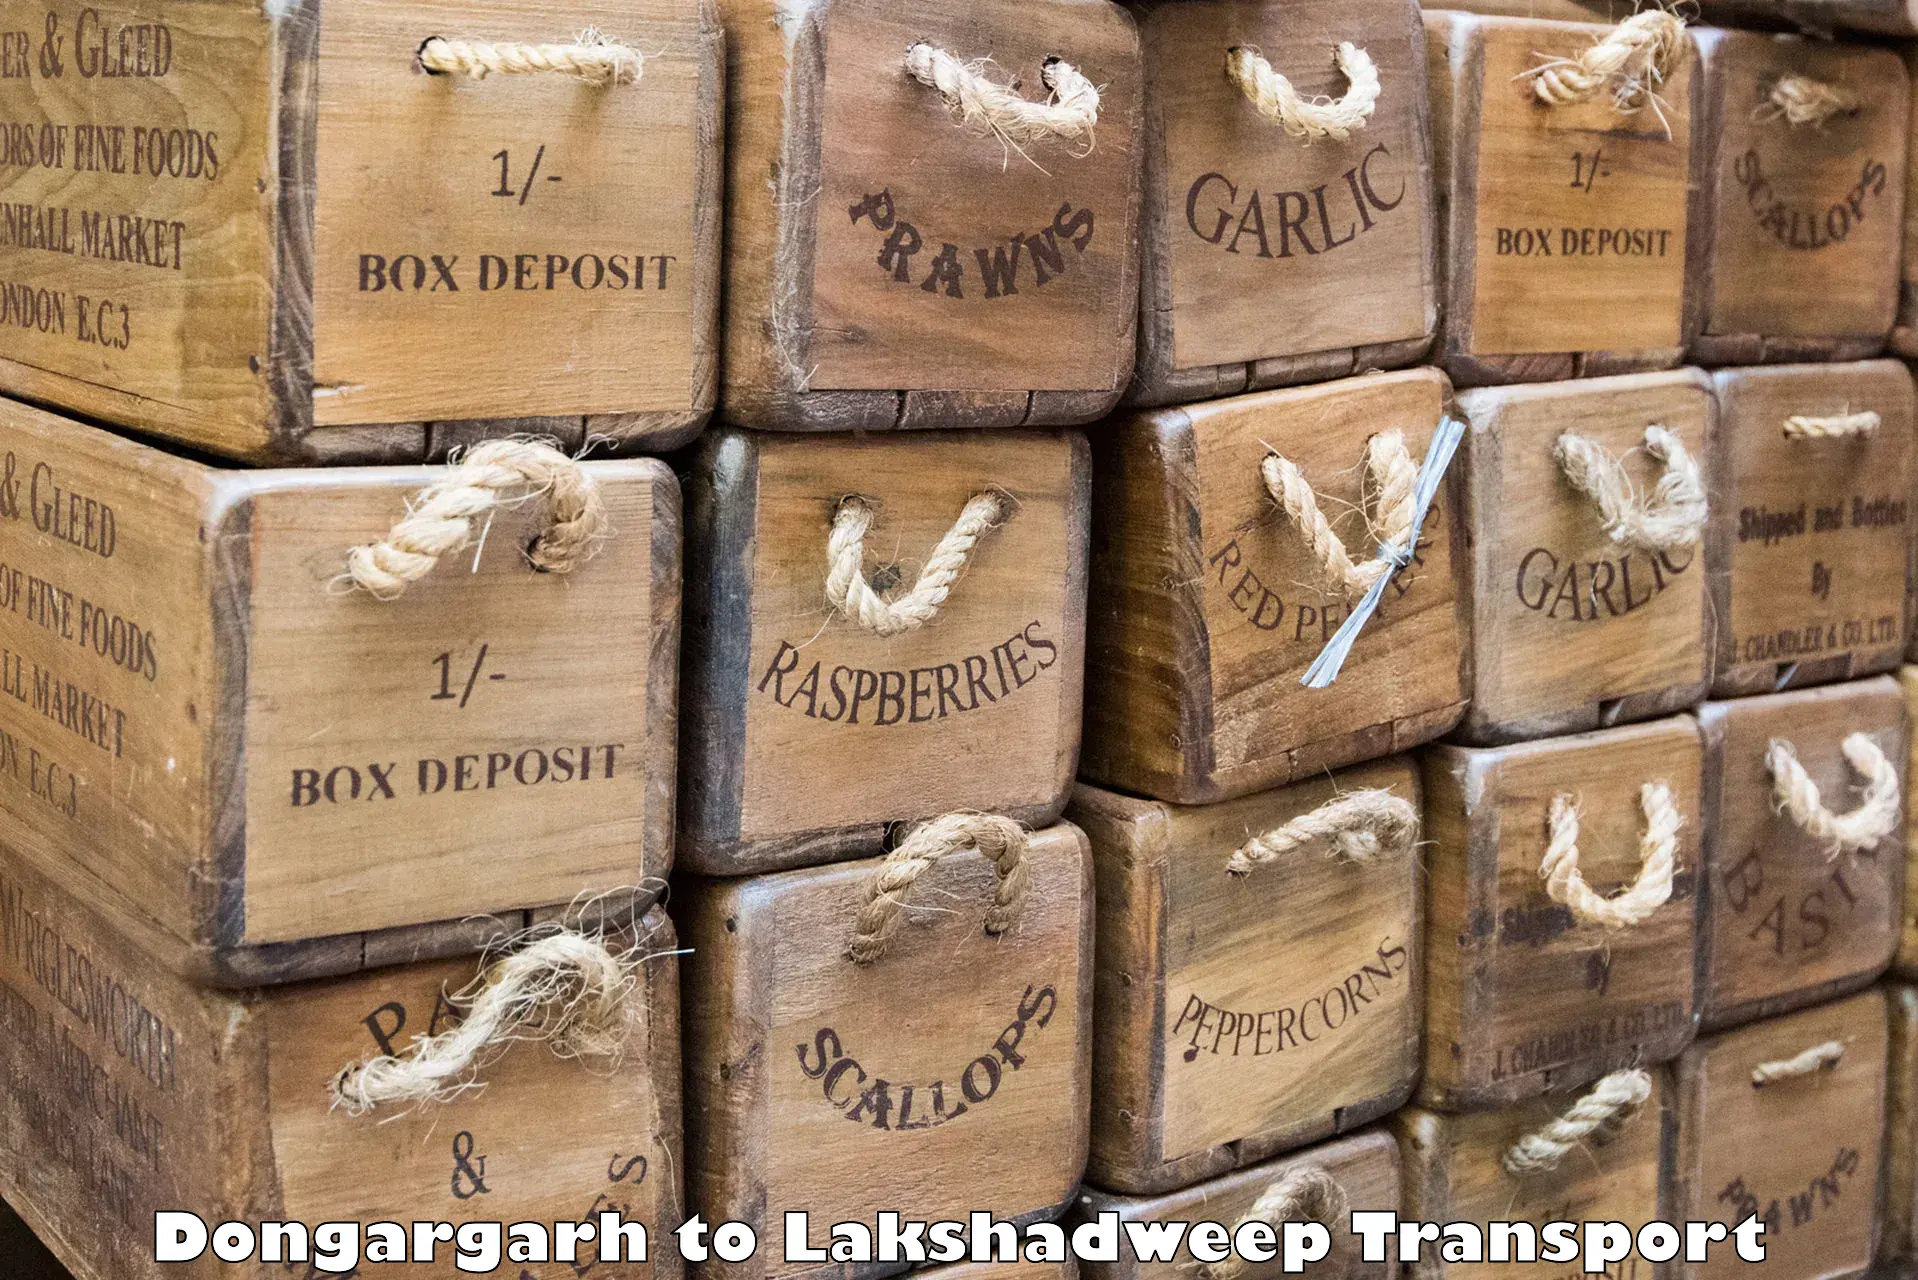 Container transport service Dongargarh to Lakshadweep